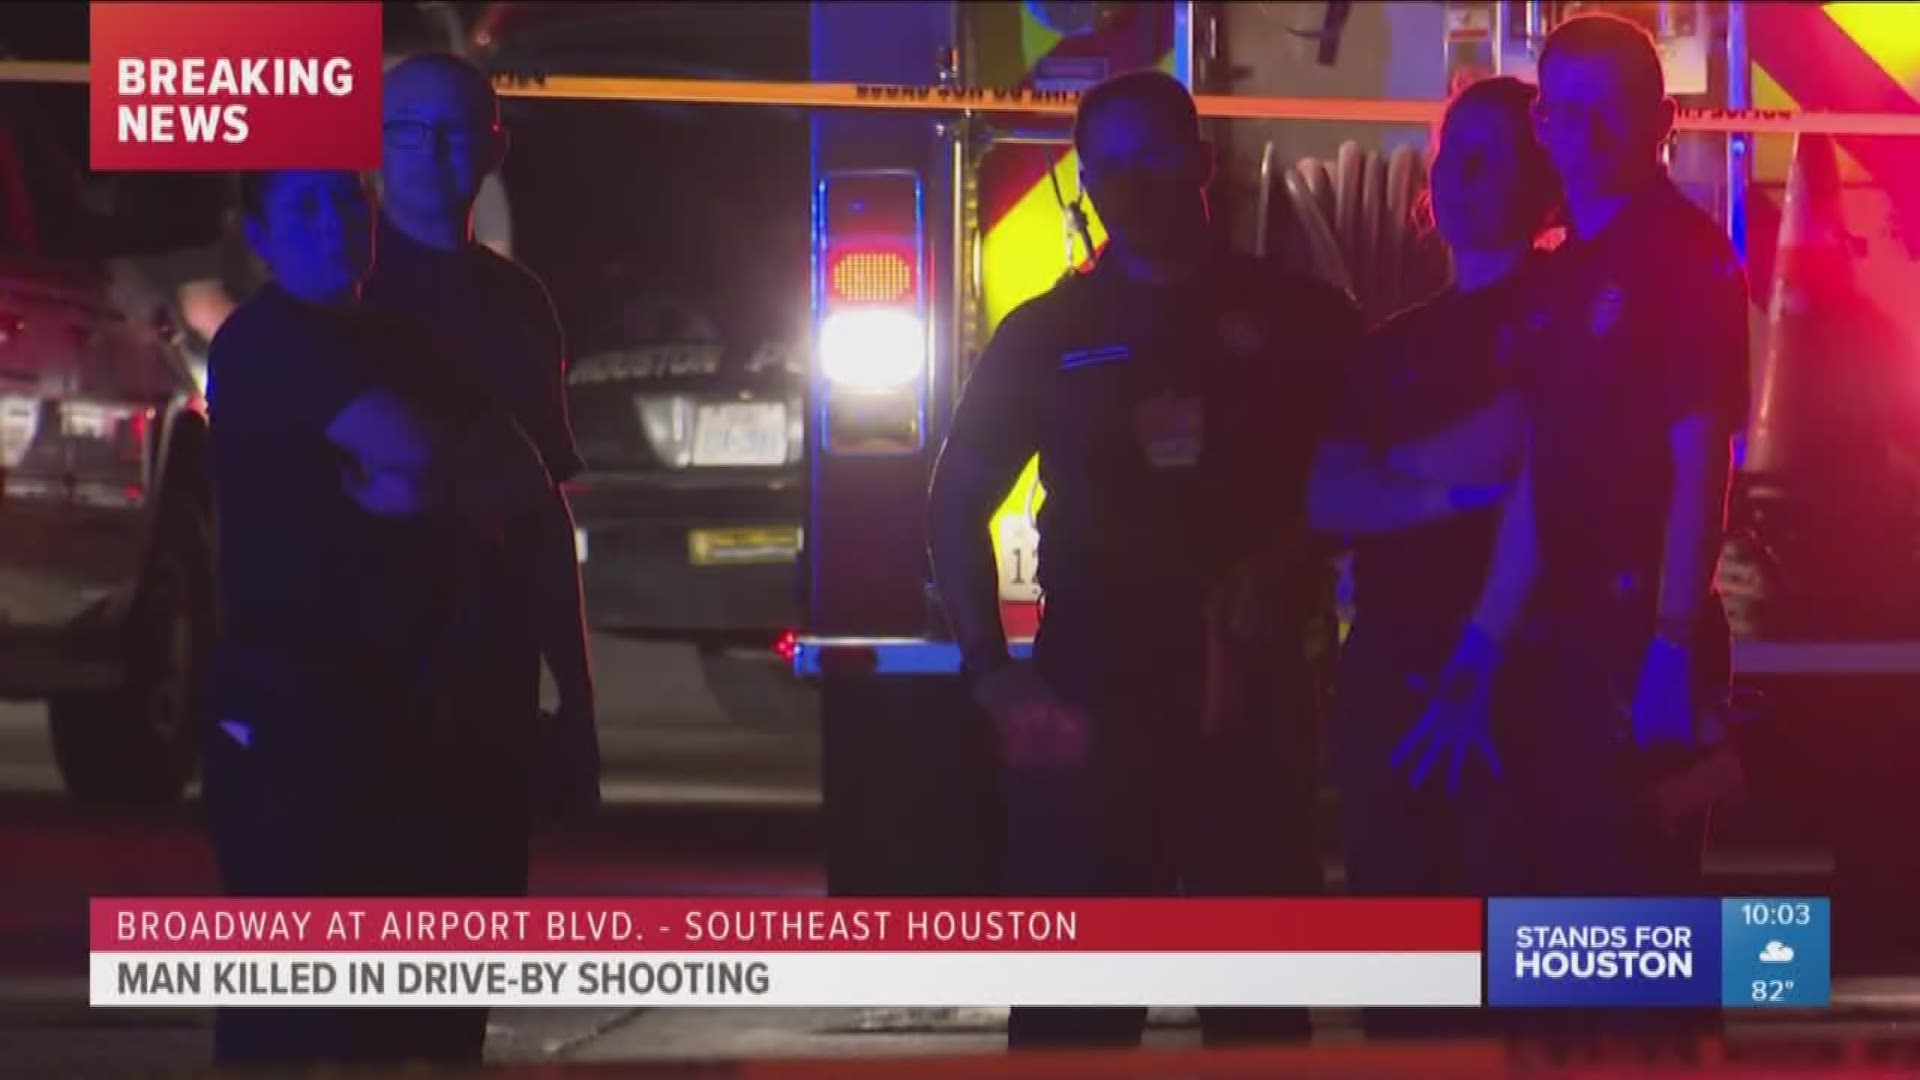 A man was killed in a drive-by shooting Wednesday in southeast Houston.